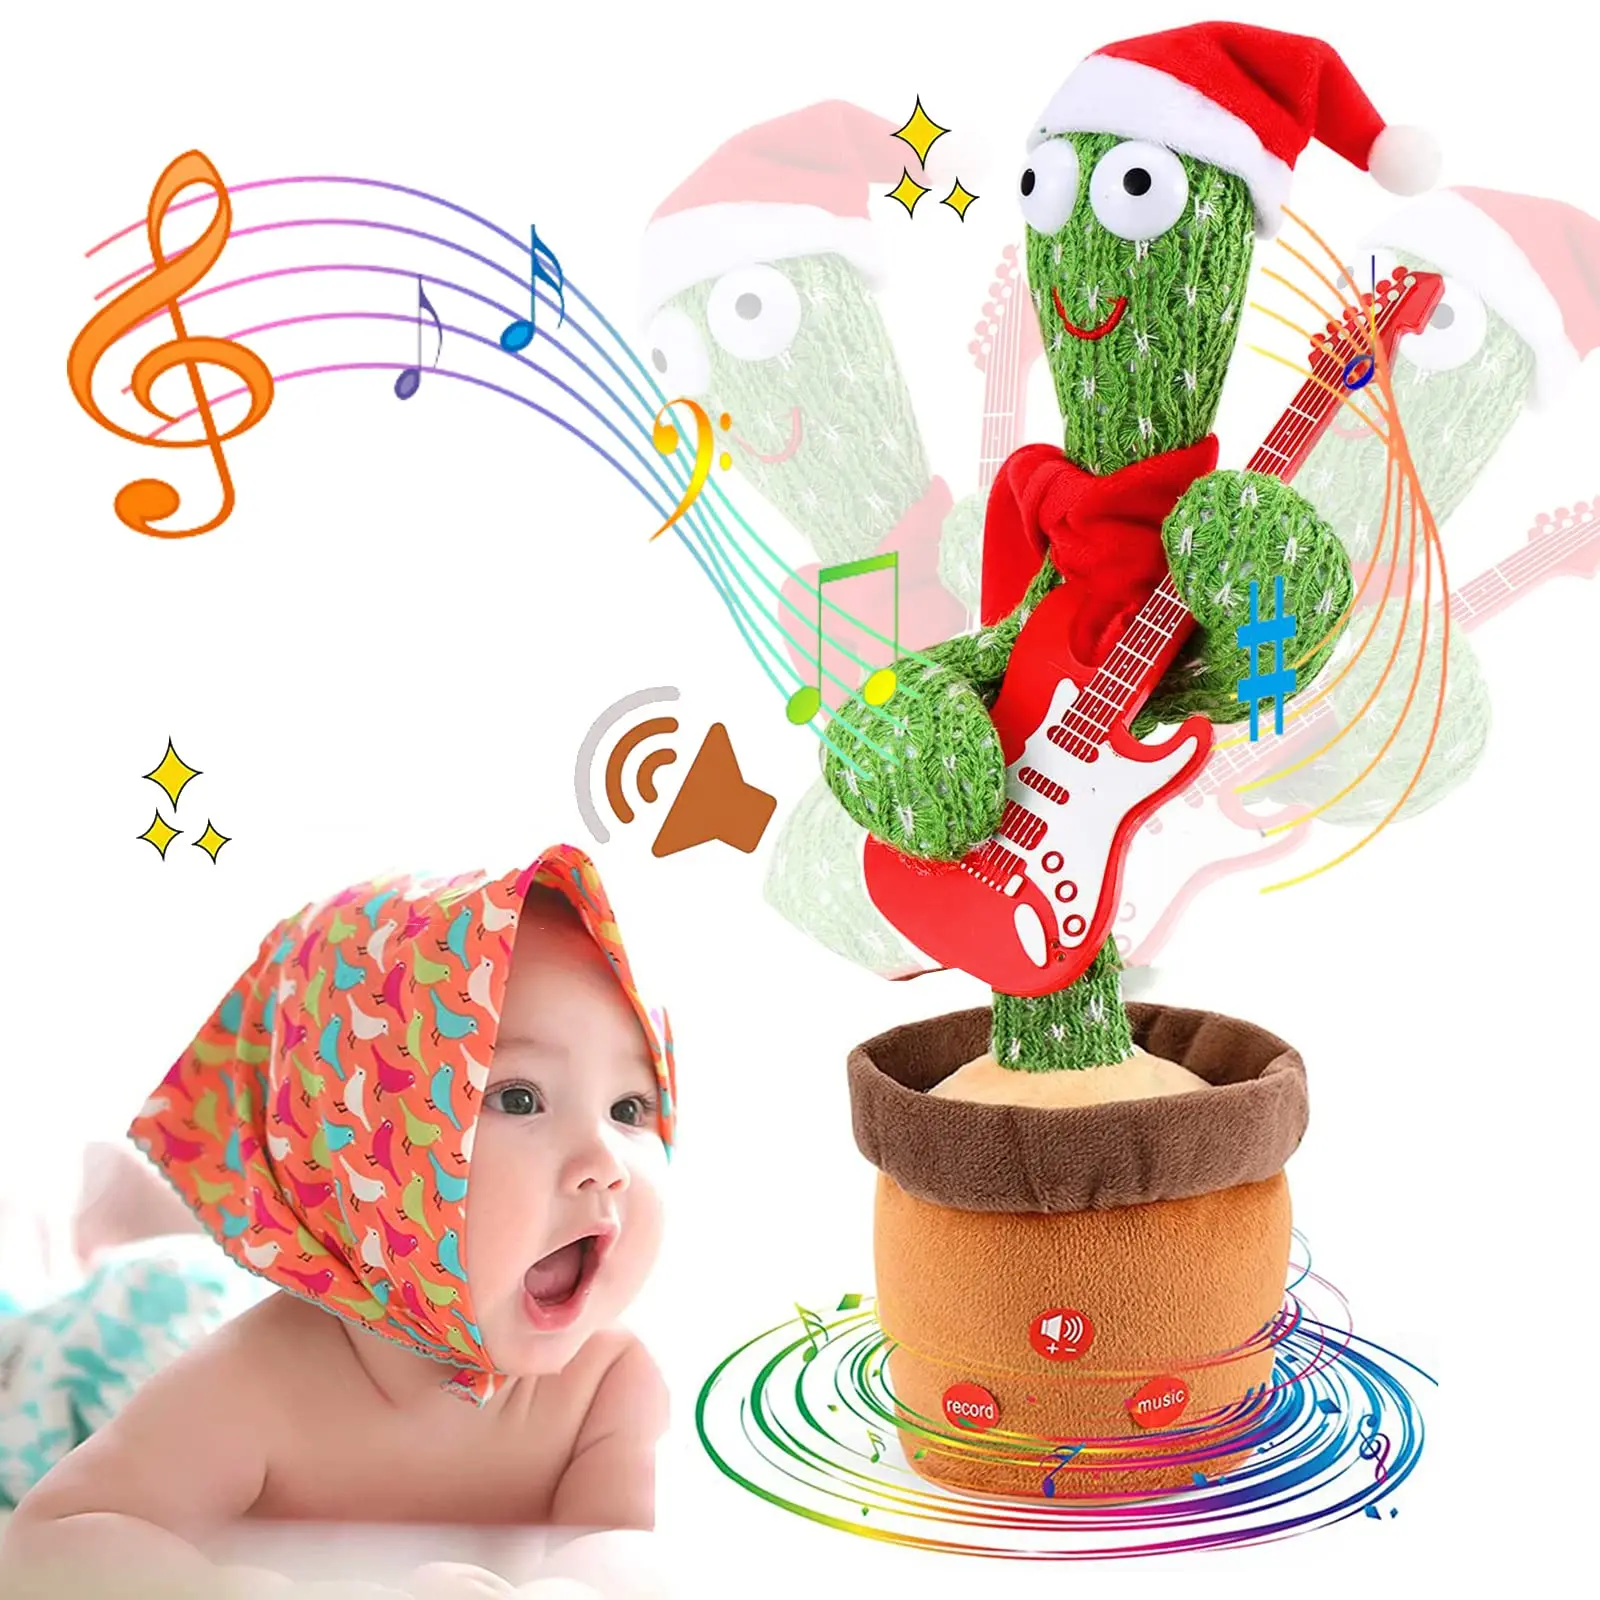 

Dancing Cactus Repeat Talking Toy Song Speaker Twisting Learning to Talk Recording Electronic Animals Plush Doll Stuffed Toys